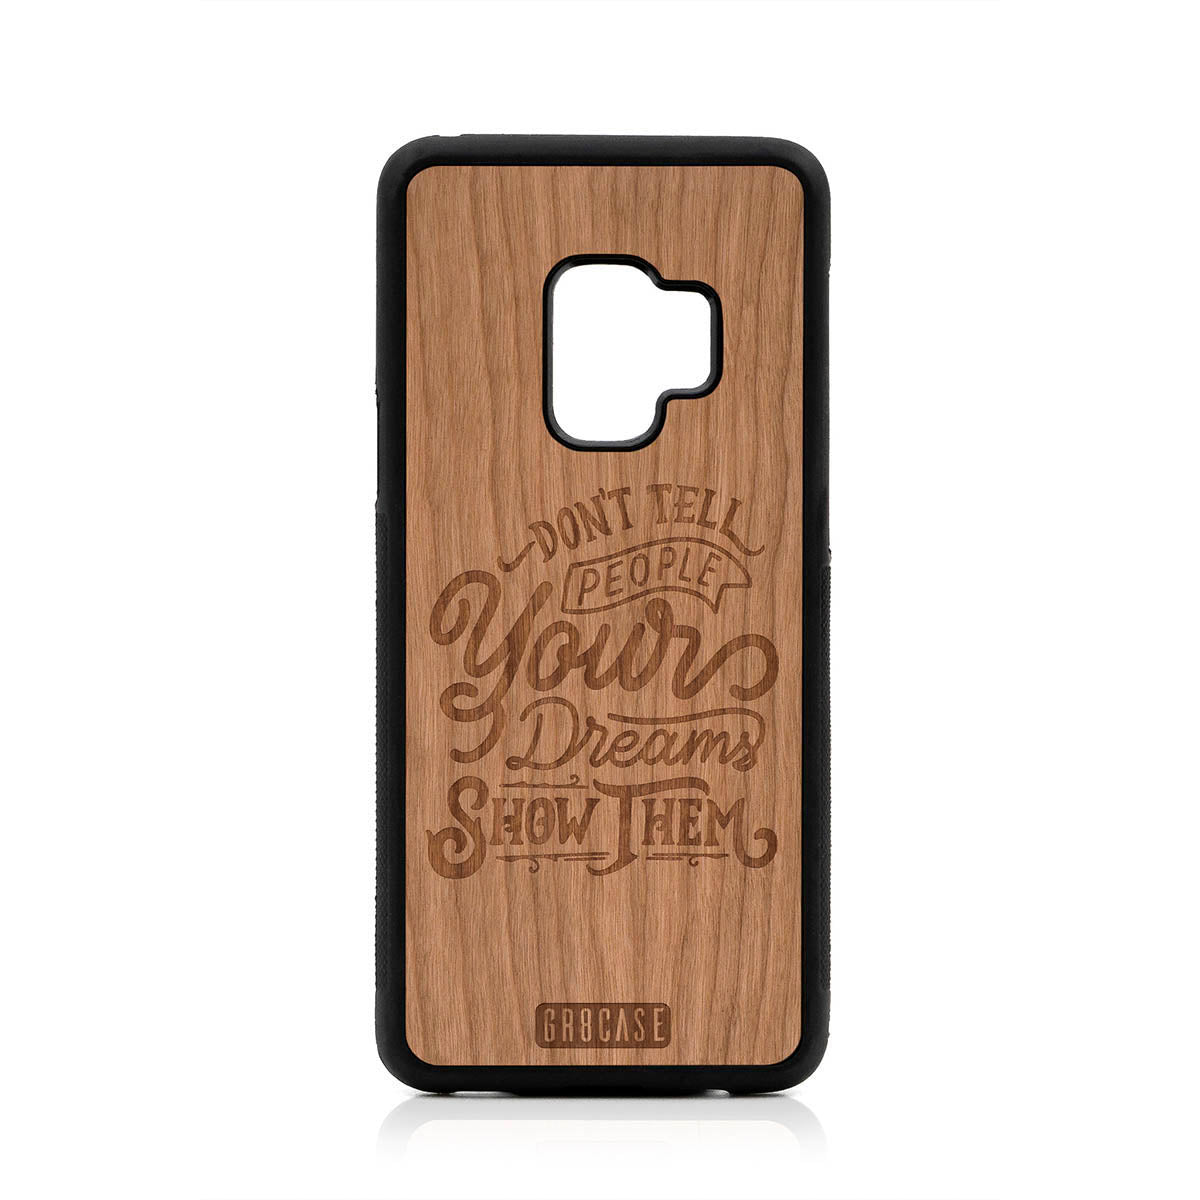 Don't Tell People Your Dreams Show Them Design Wood Case For Samsung Galaxy S9 by GR8CASE